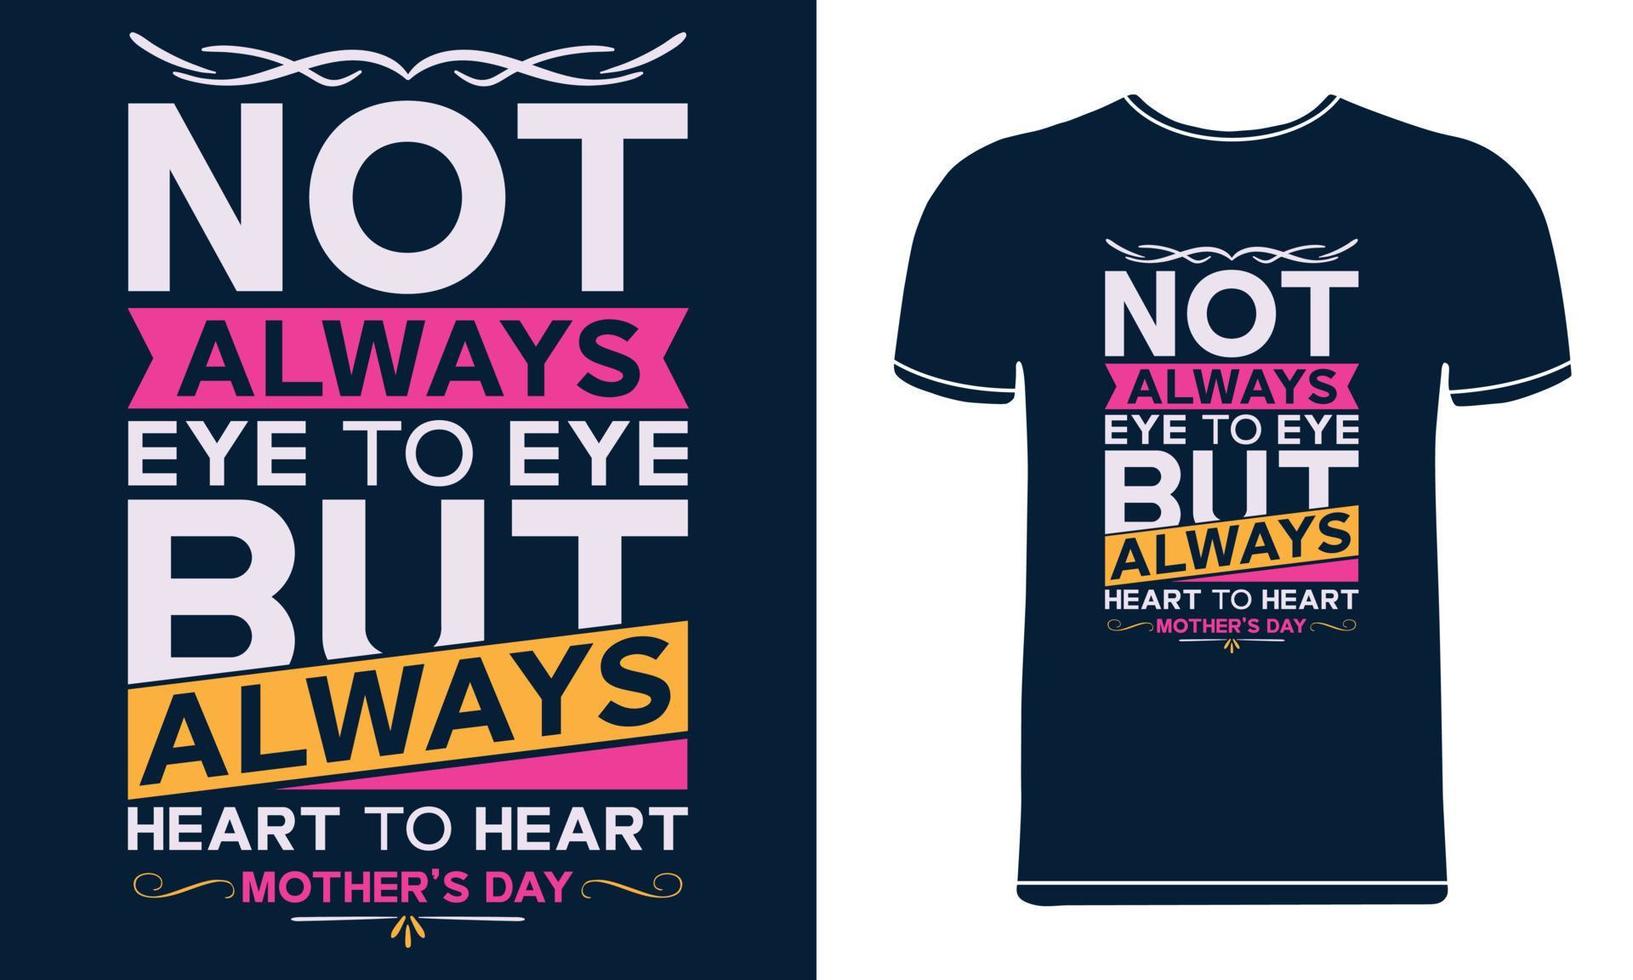 Not always eye to eye but always heart to heart mothers day t shirt design. vector